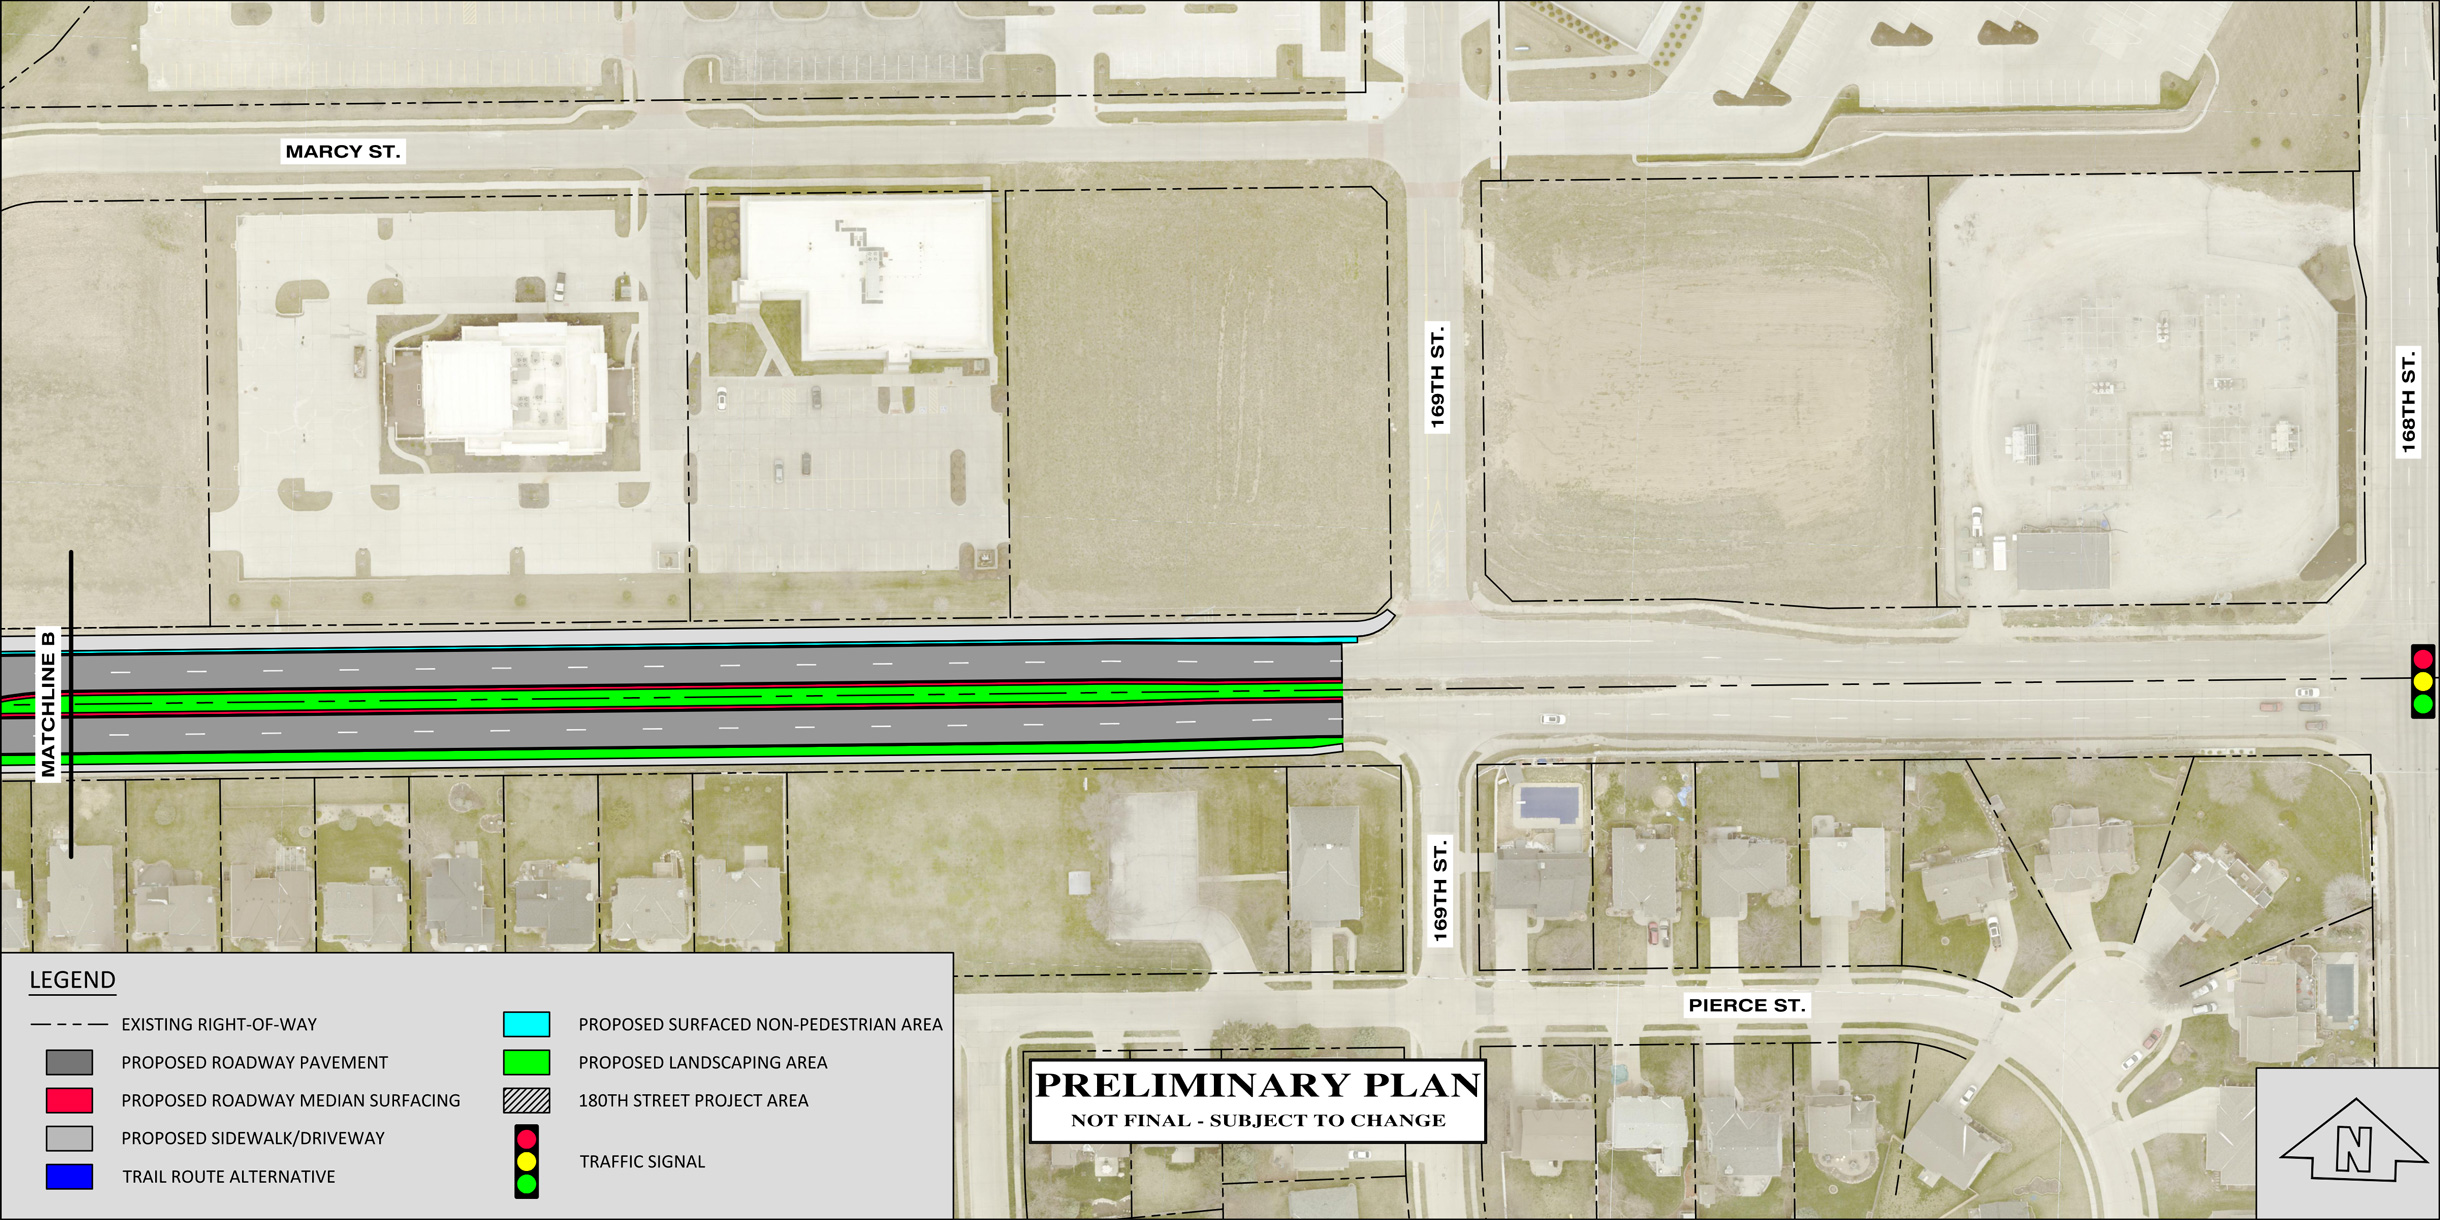 Detailed plan map of preliminary plans for Pacific Street improvements from 173rd and Marcy Streets to 169th Street.